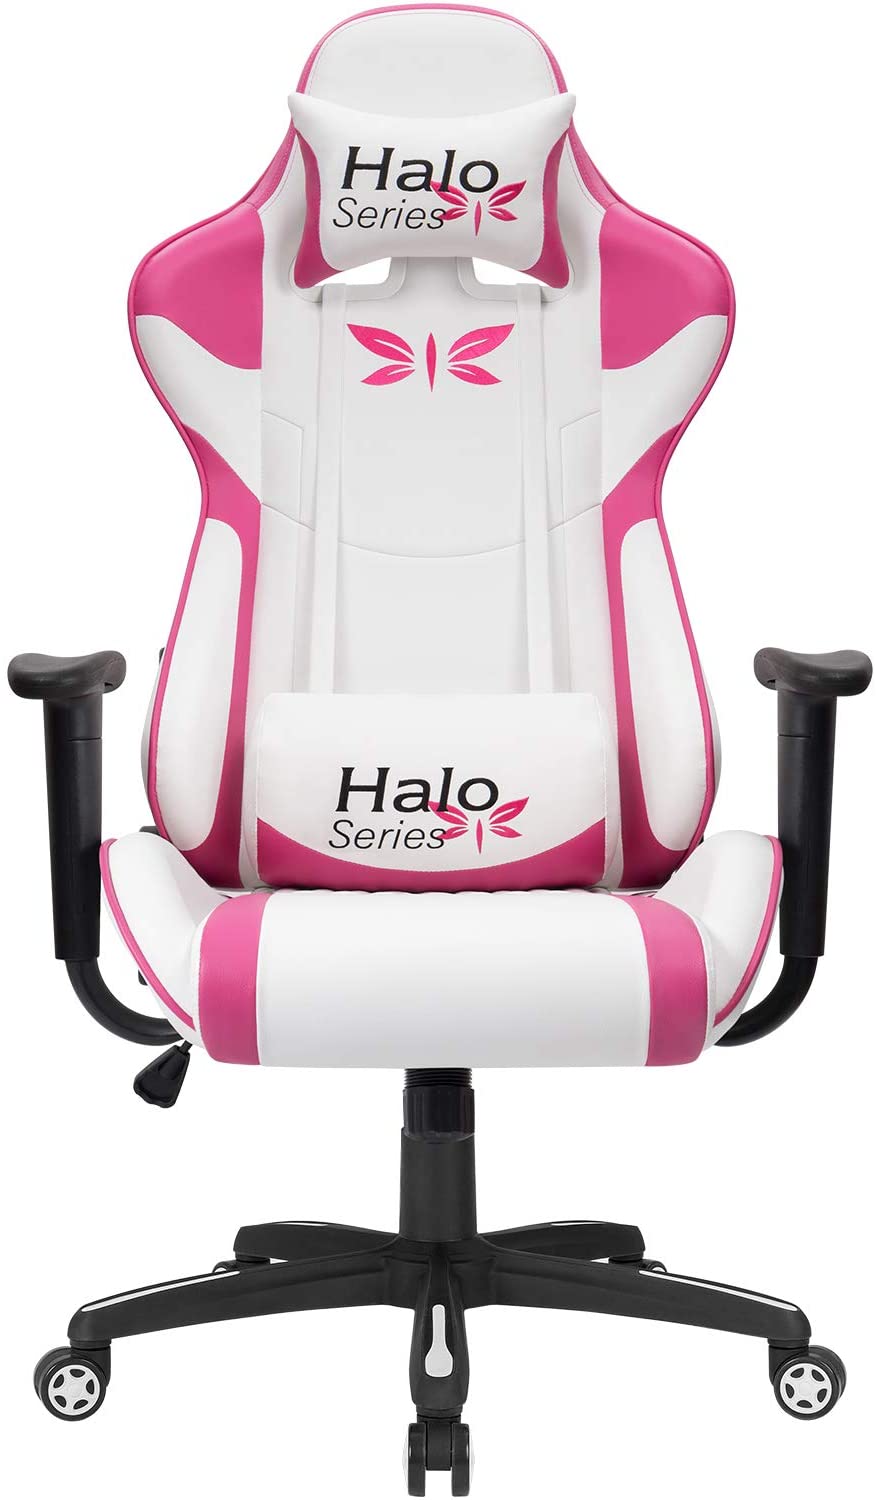 Gaming Chair Adjustable Racing Chair Halo Series Specialty Design Ergonomic Comfortable Swivel Computer Chair with Headrest and Lumbar Support (Pink)